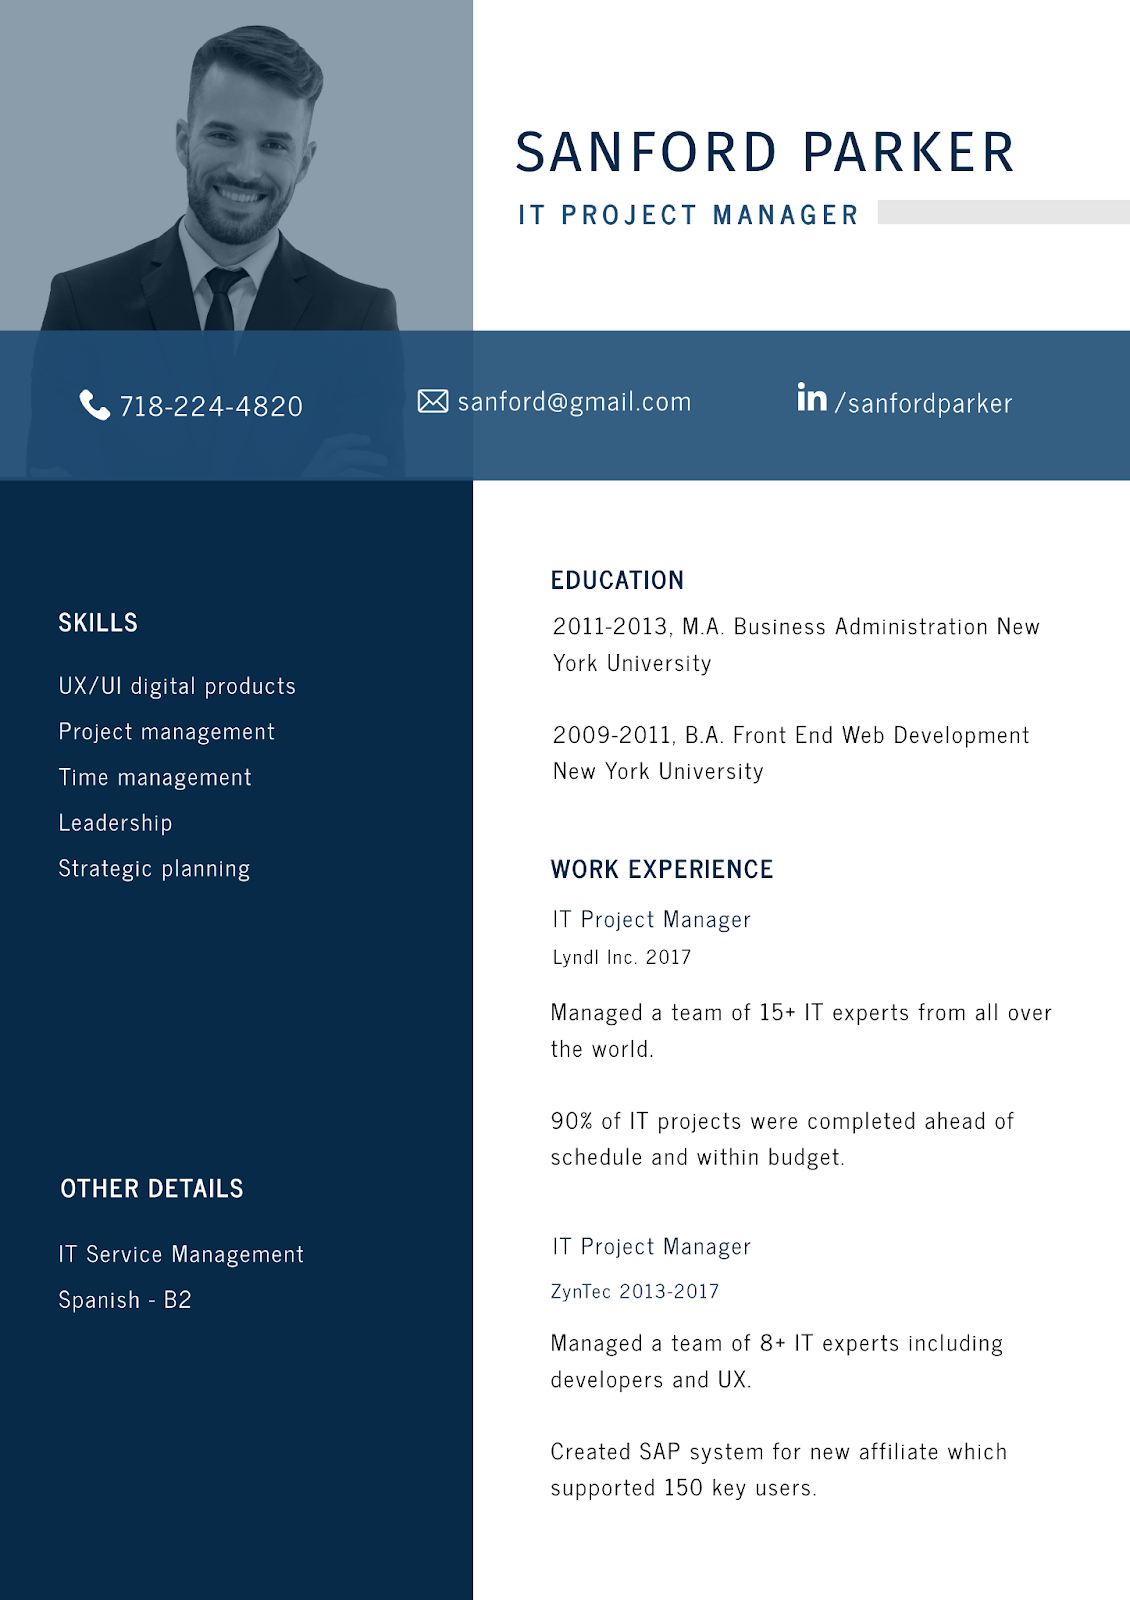 IT Project Manager Resume Template by DocHipo